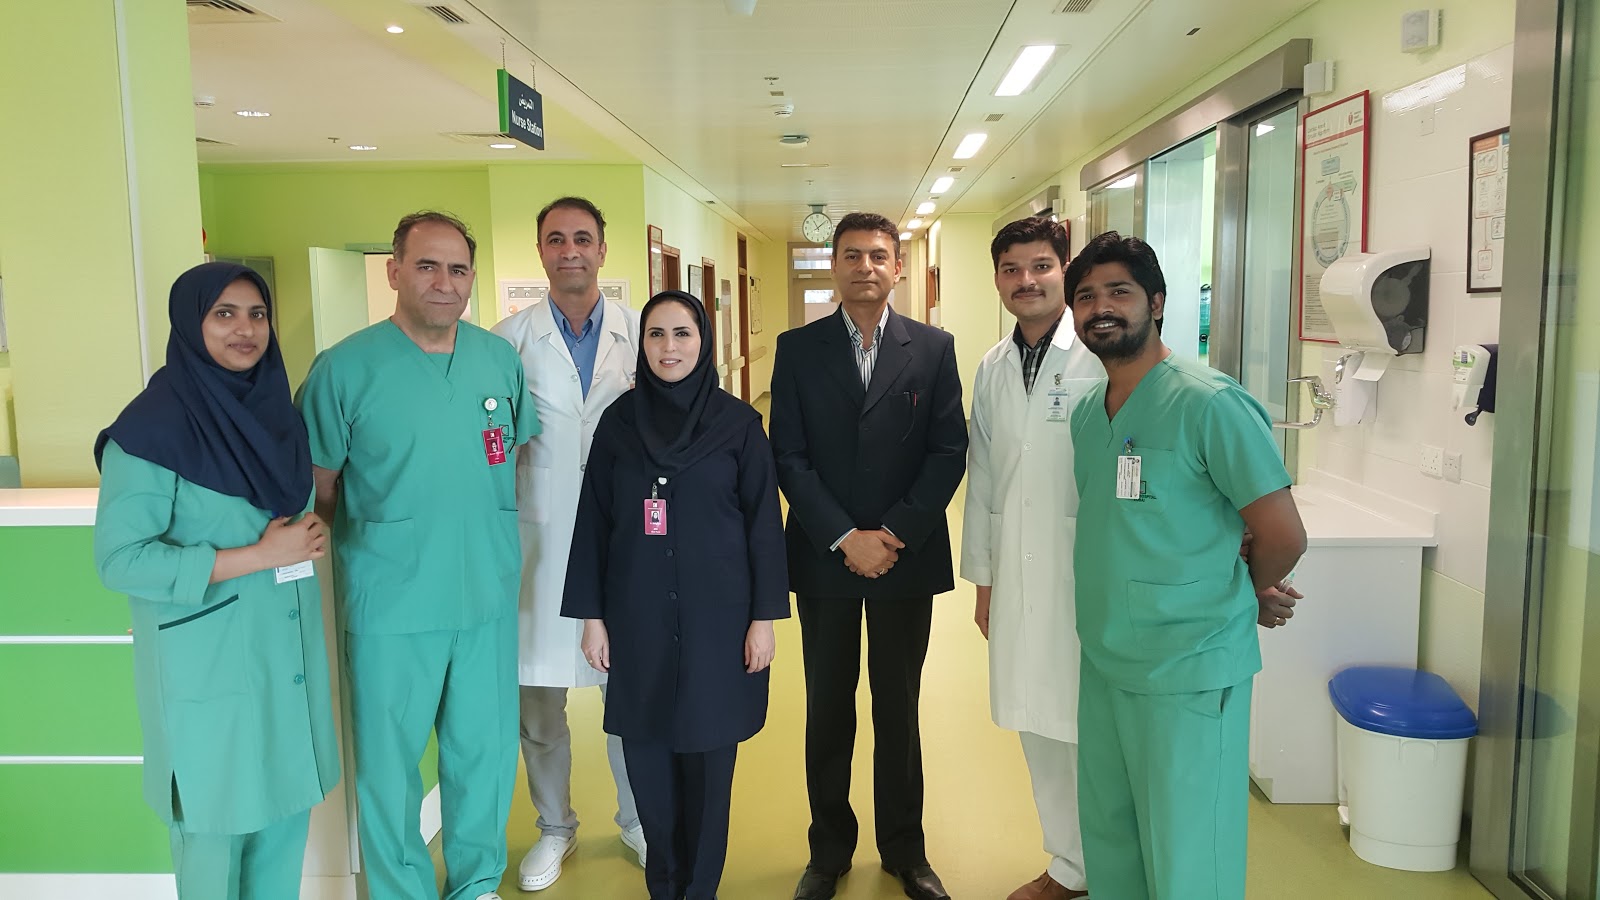 Dr. Abbas with the ICU staff of the Iranian hospital in Dubai